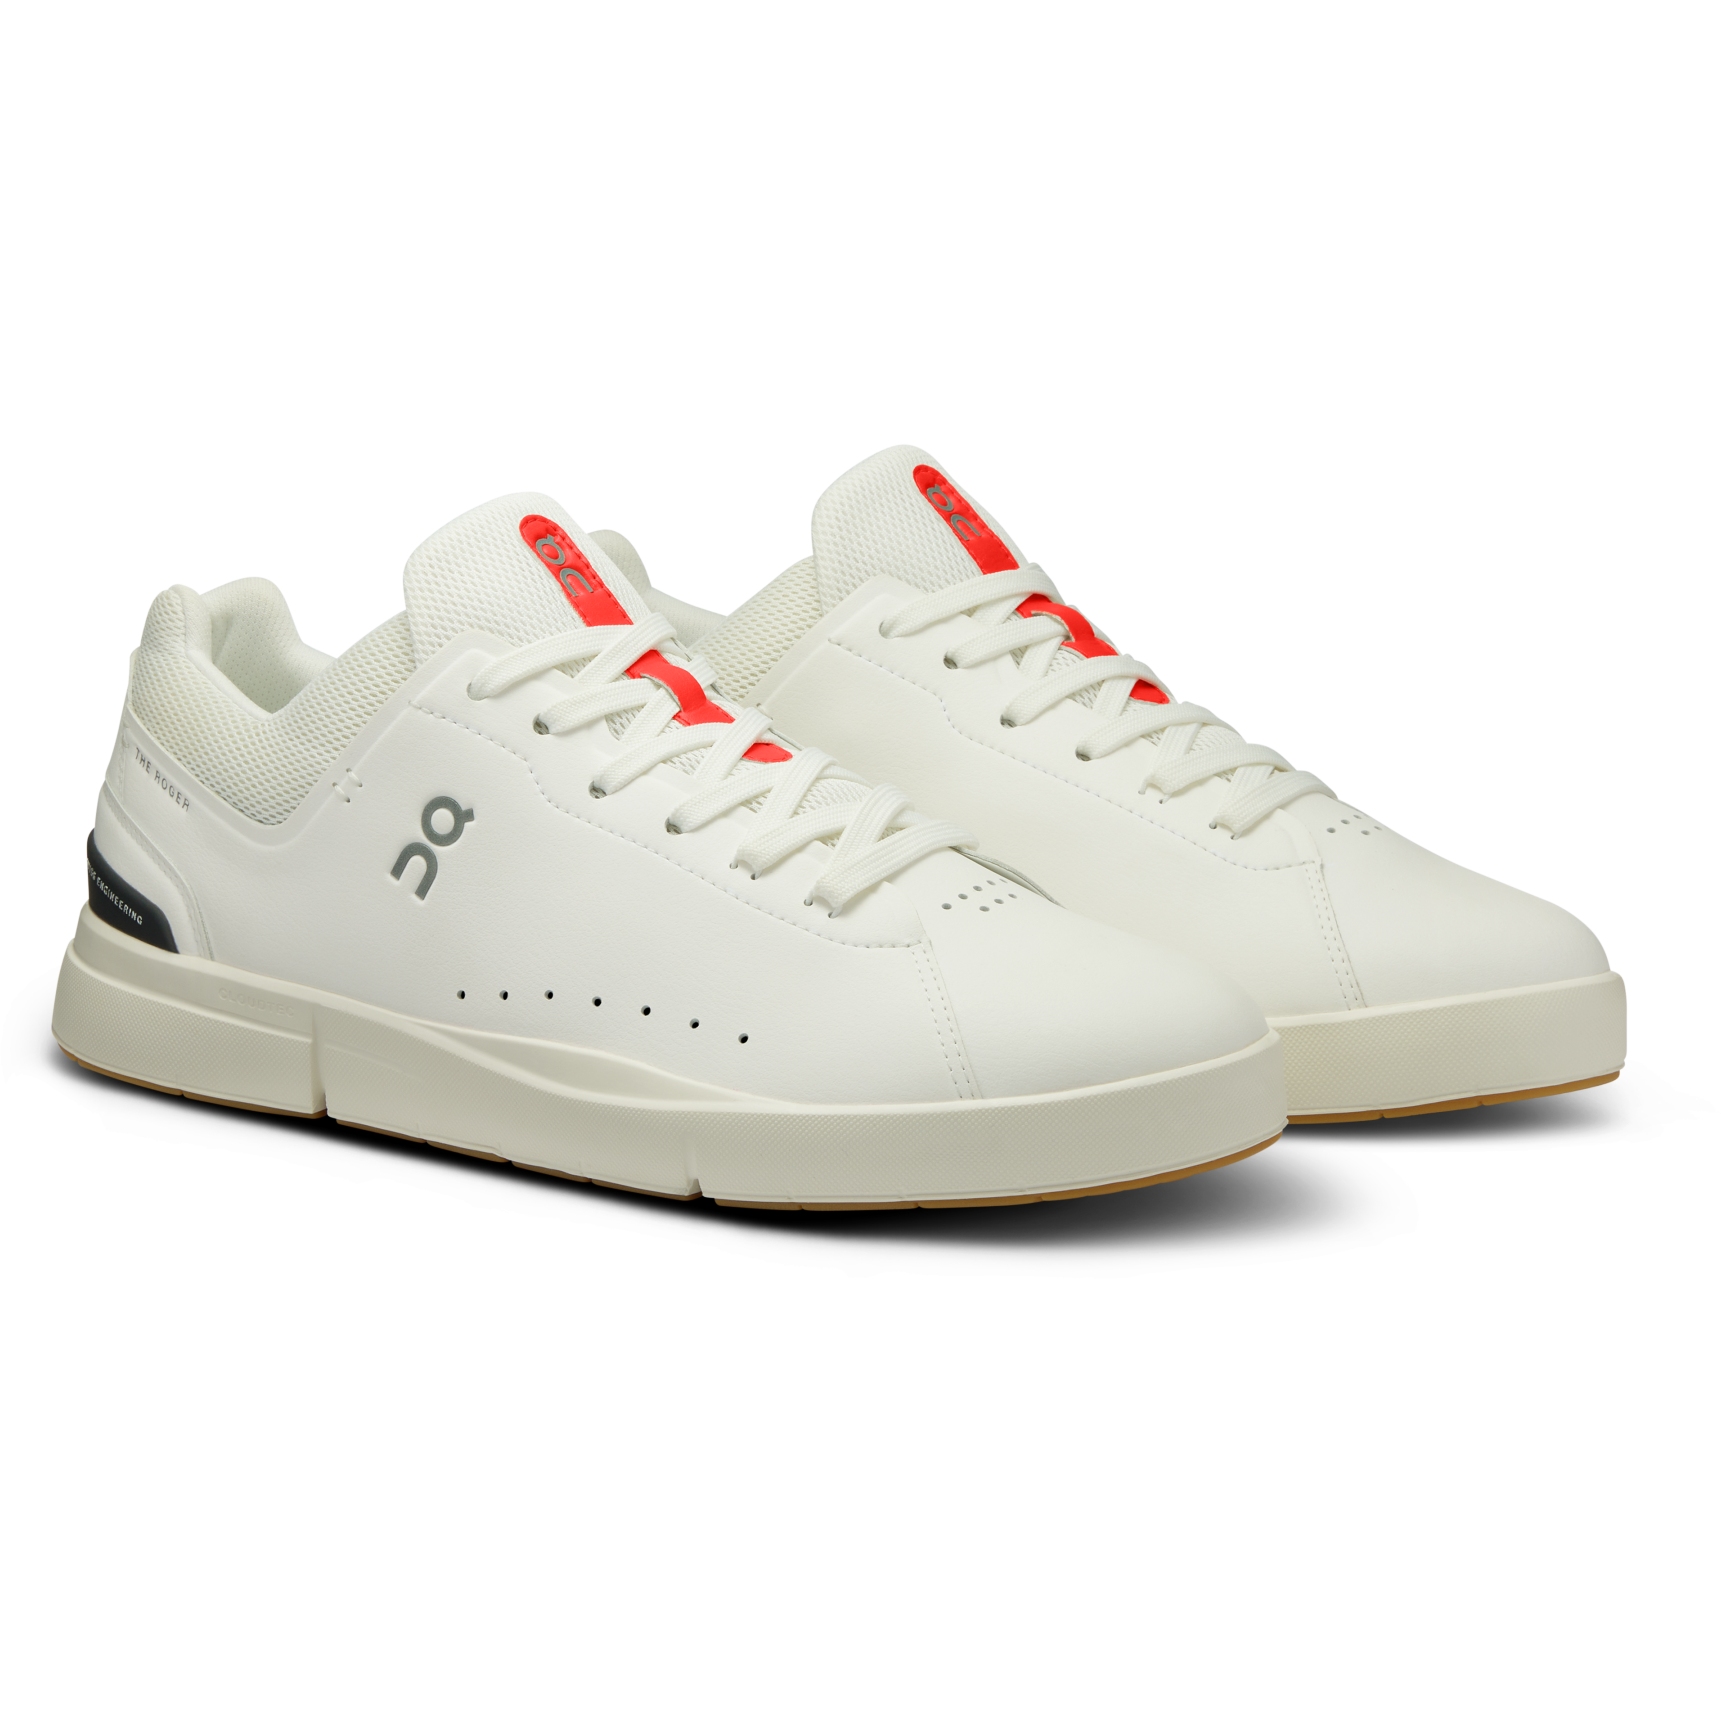 Productfoto van On The Roger Advantage Sneaker - White &amp; Spice